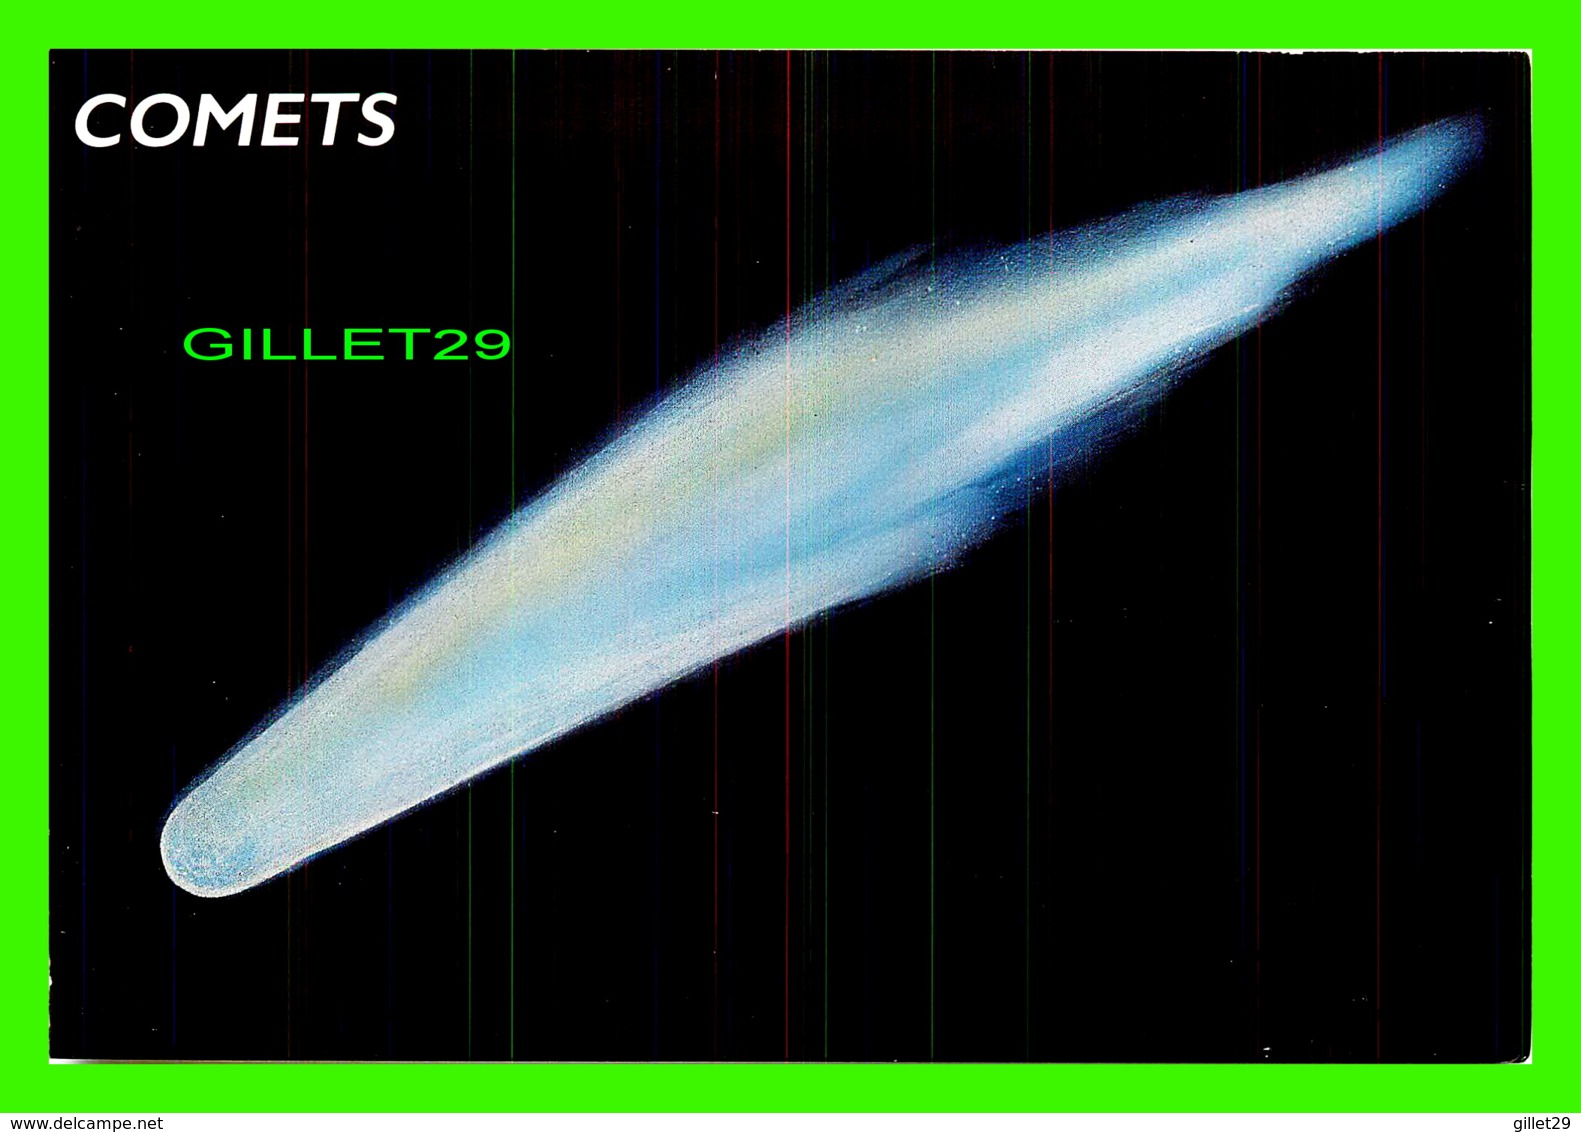 ASTRONOMIE - COMETS - ILLUSTRATED BY BRUCE LAFONTAINE - DIMENSION 11.5 X 17 Cm - - Astronomia